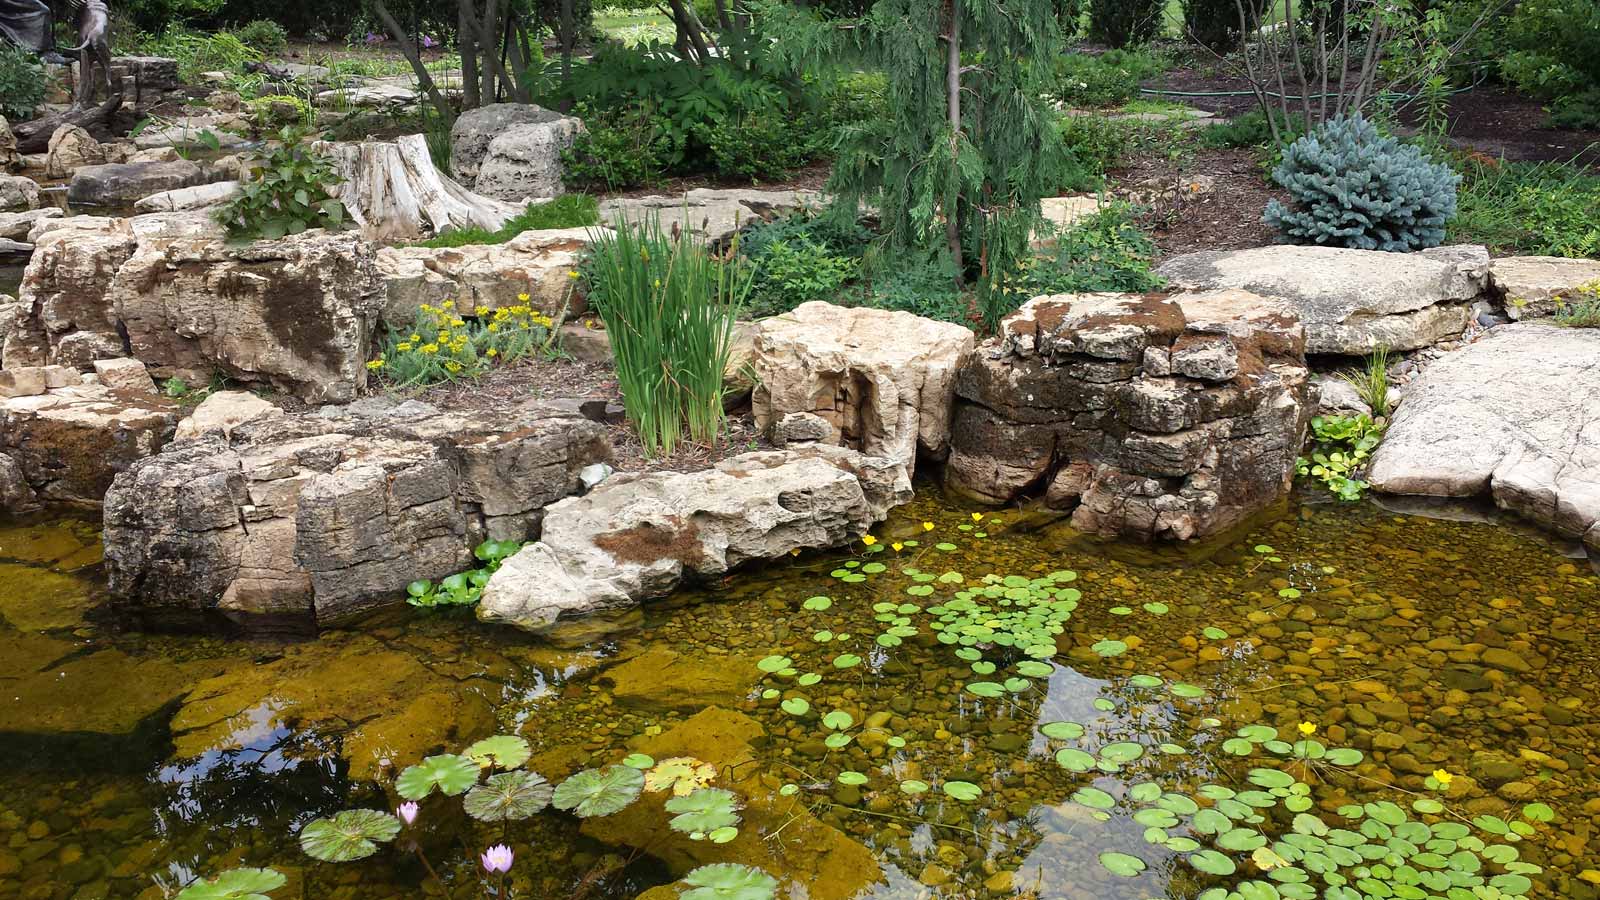 Year-round Landscaping Services for Your Home